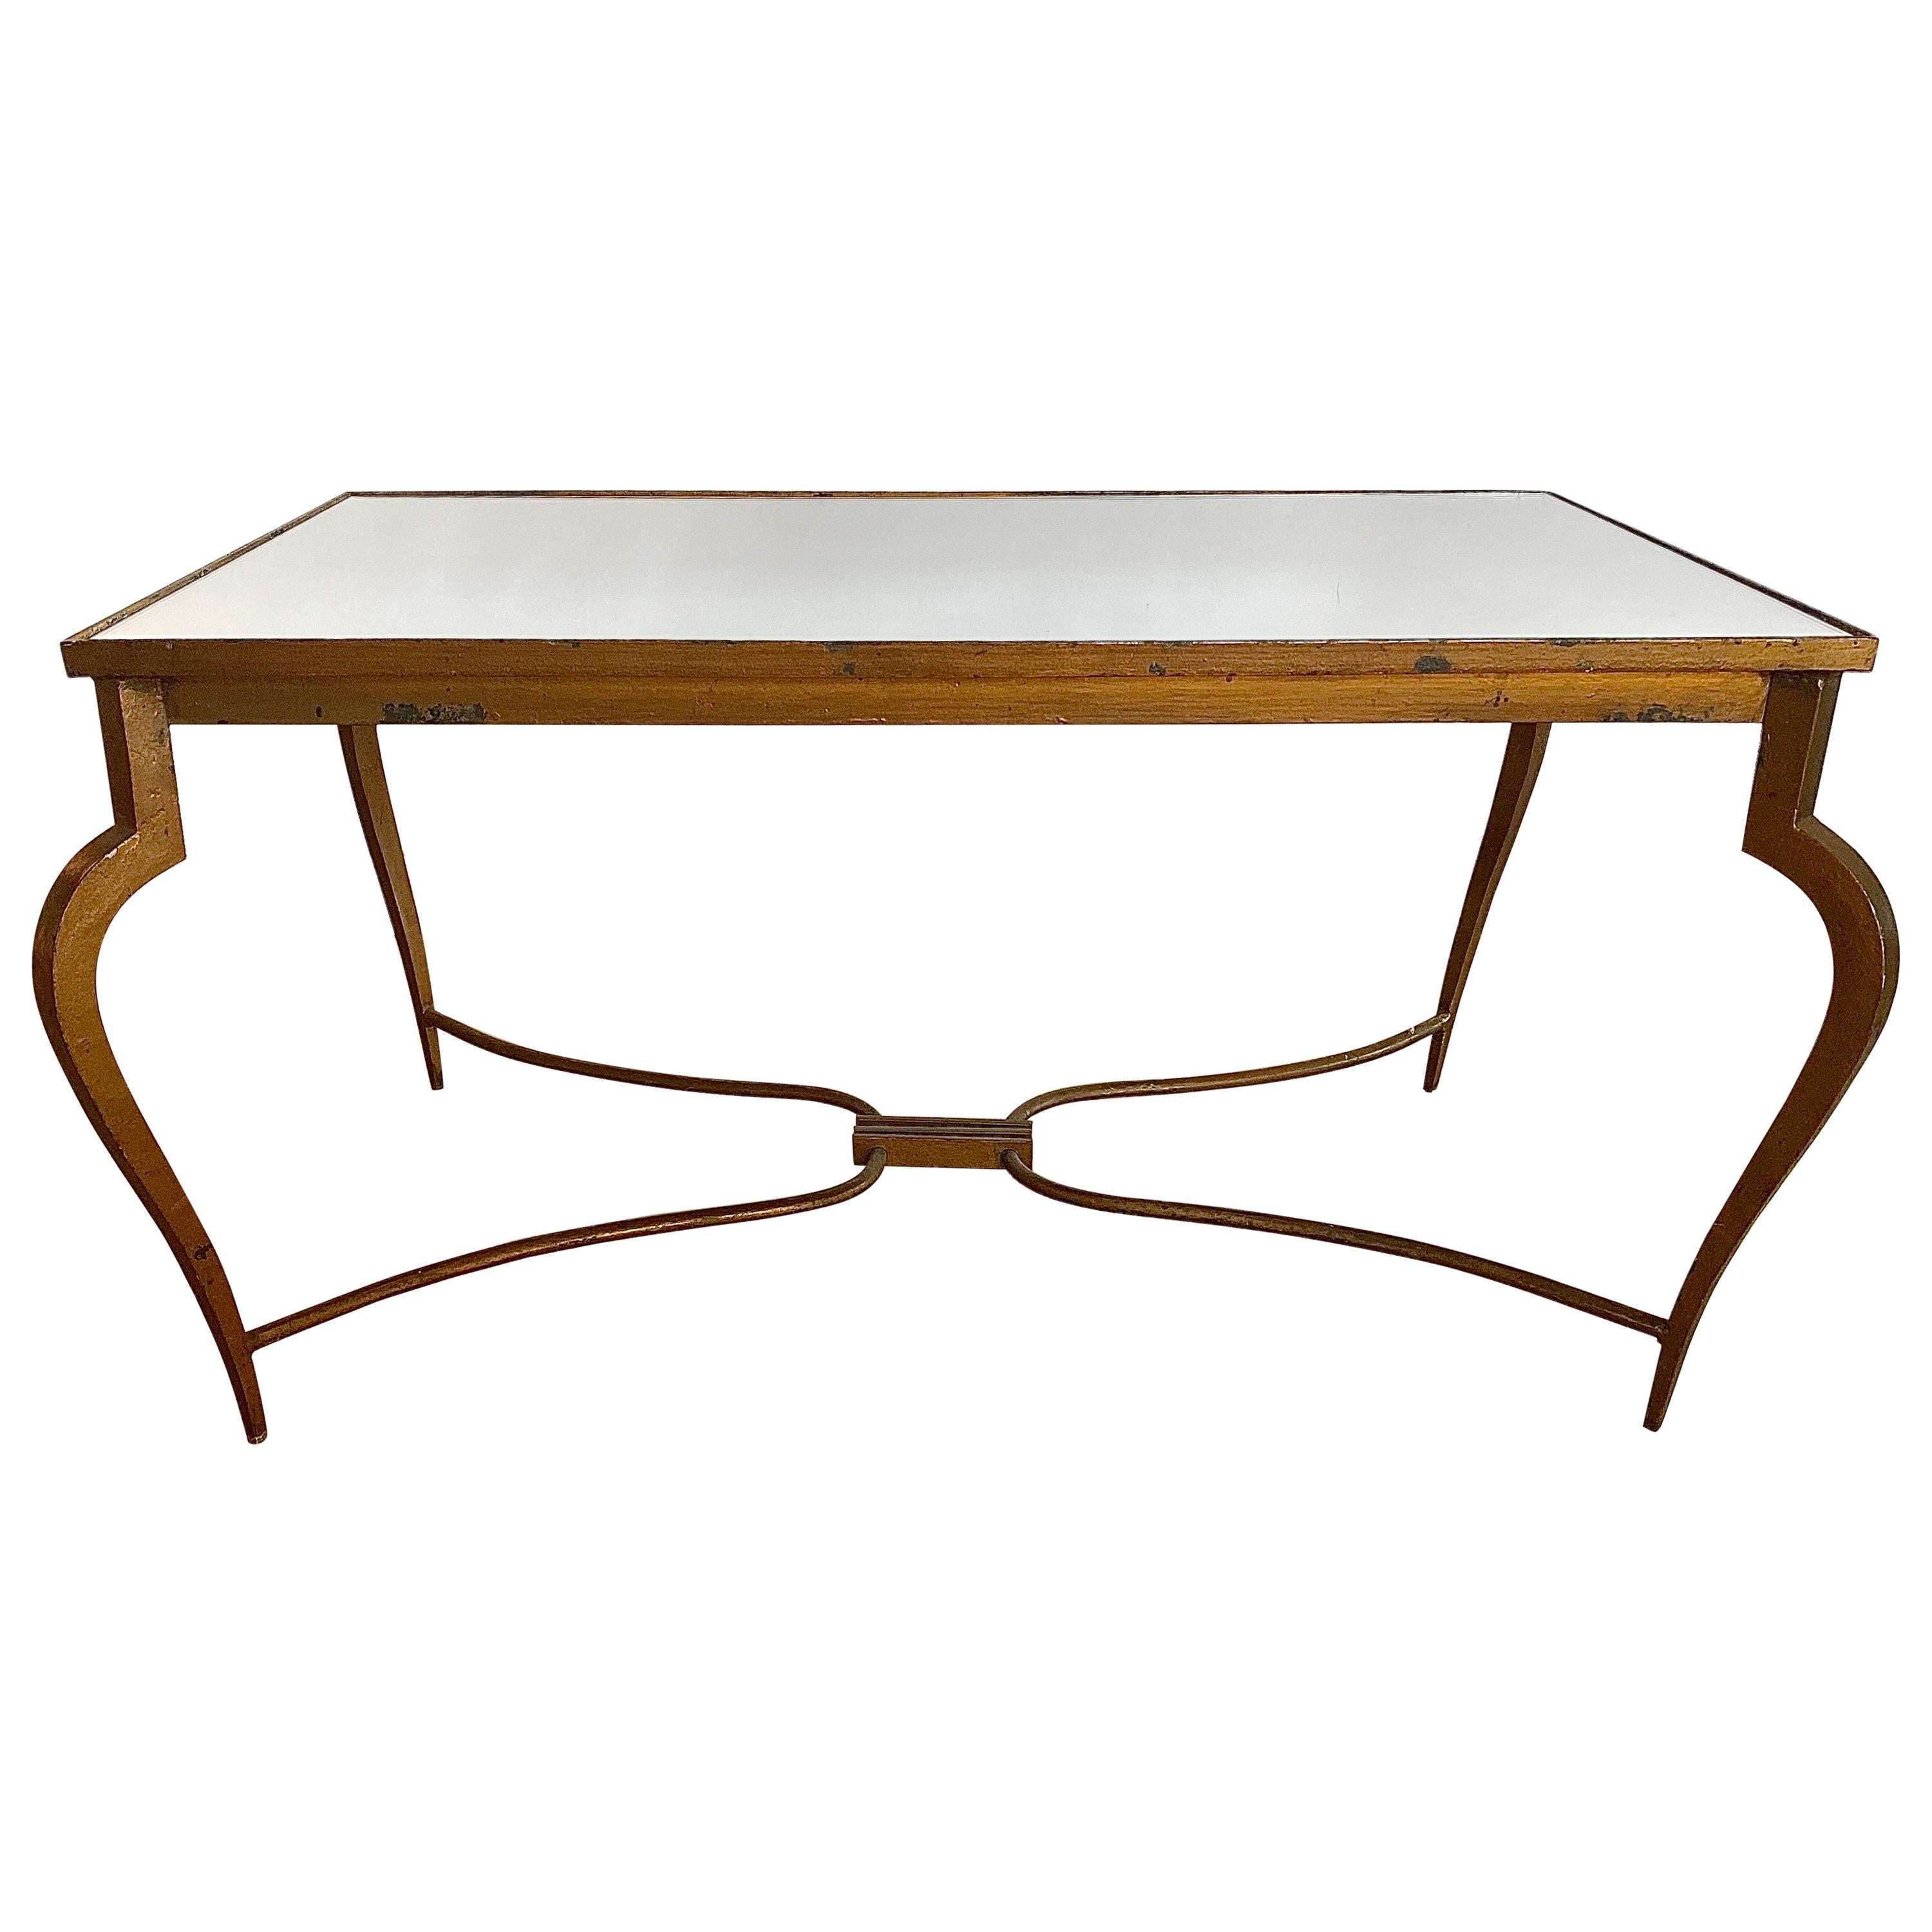 Mirrored René Prou Coffee or Cocktail Table in Gold Painted Forged Iron, 1940s For Sale